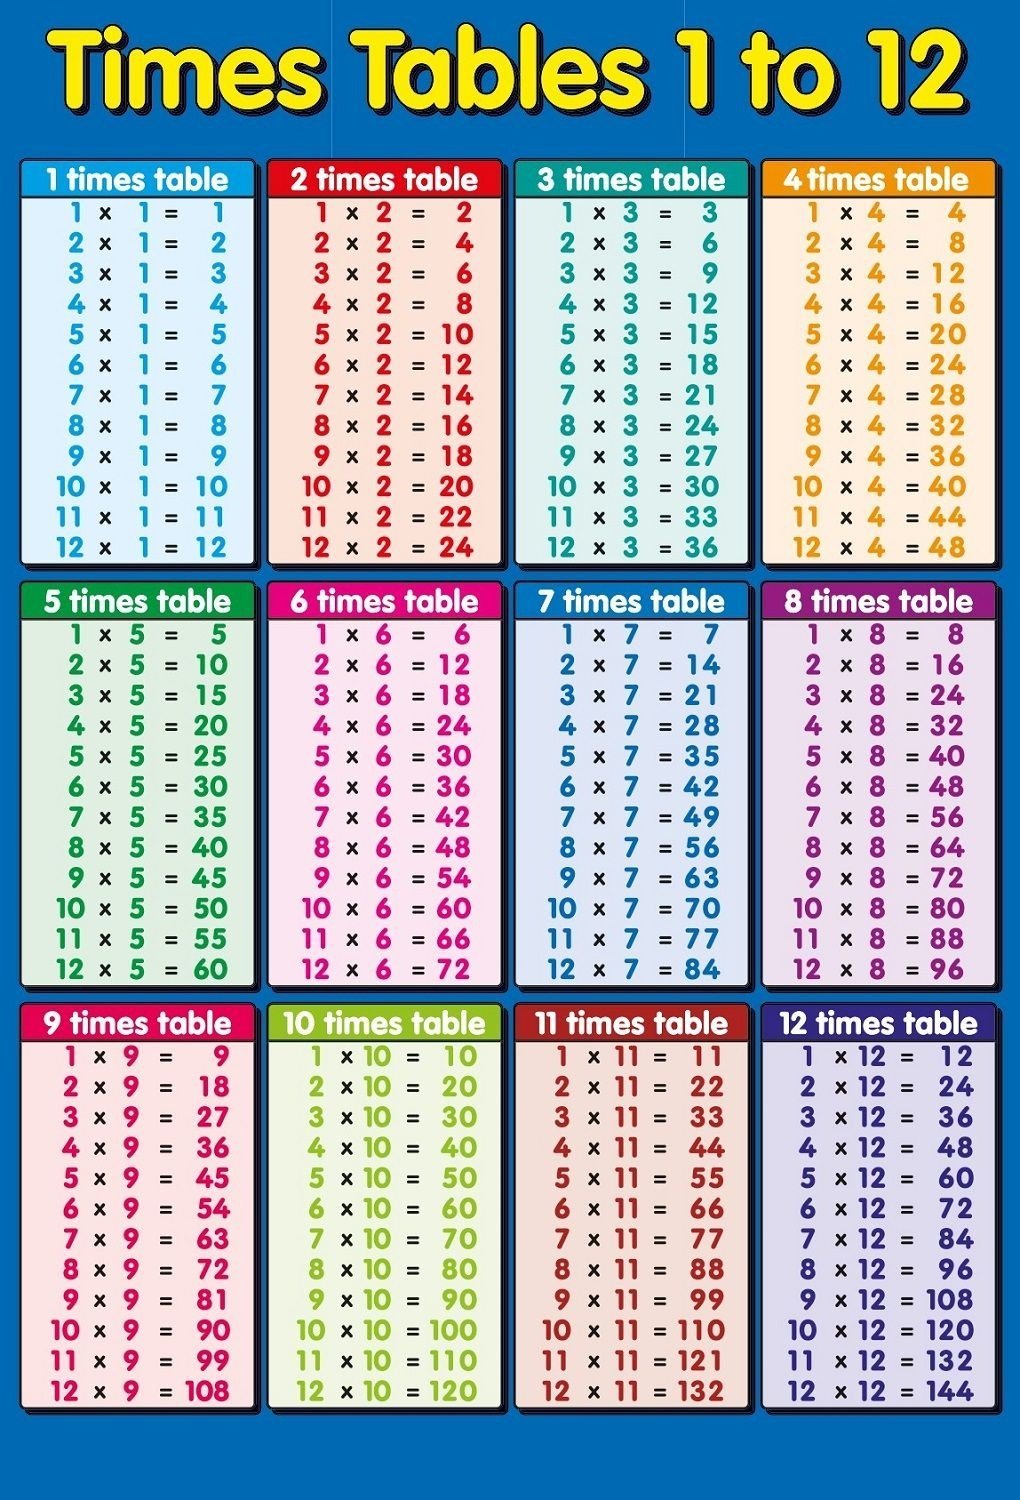 Times Table – 2-12 Worksheets – 1, 2, 3, 4, 5, 6, 7, 8, 9, 10, 11